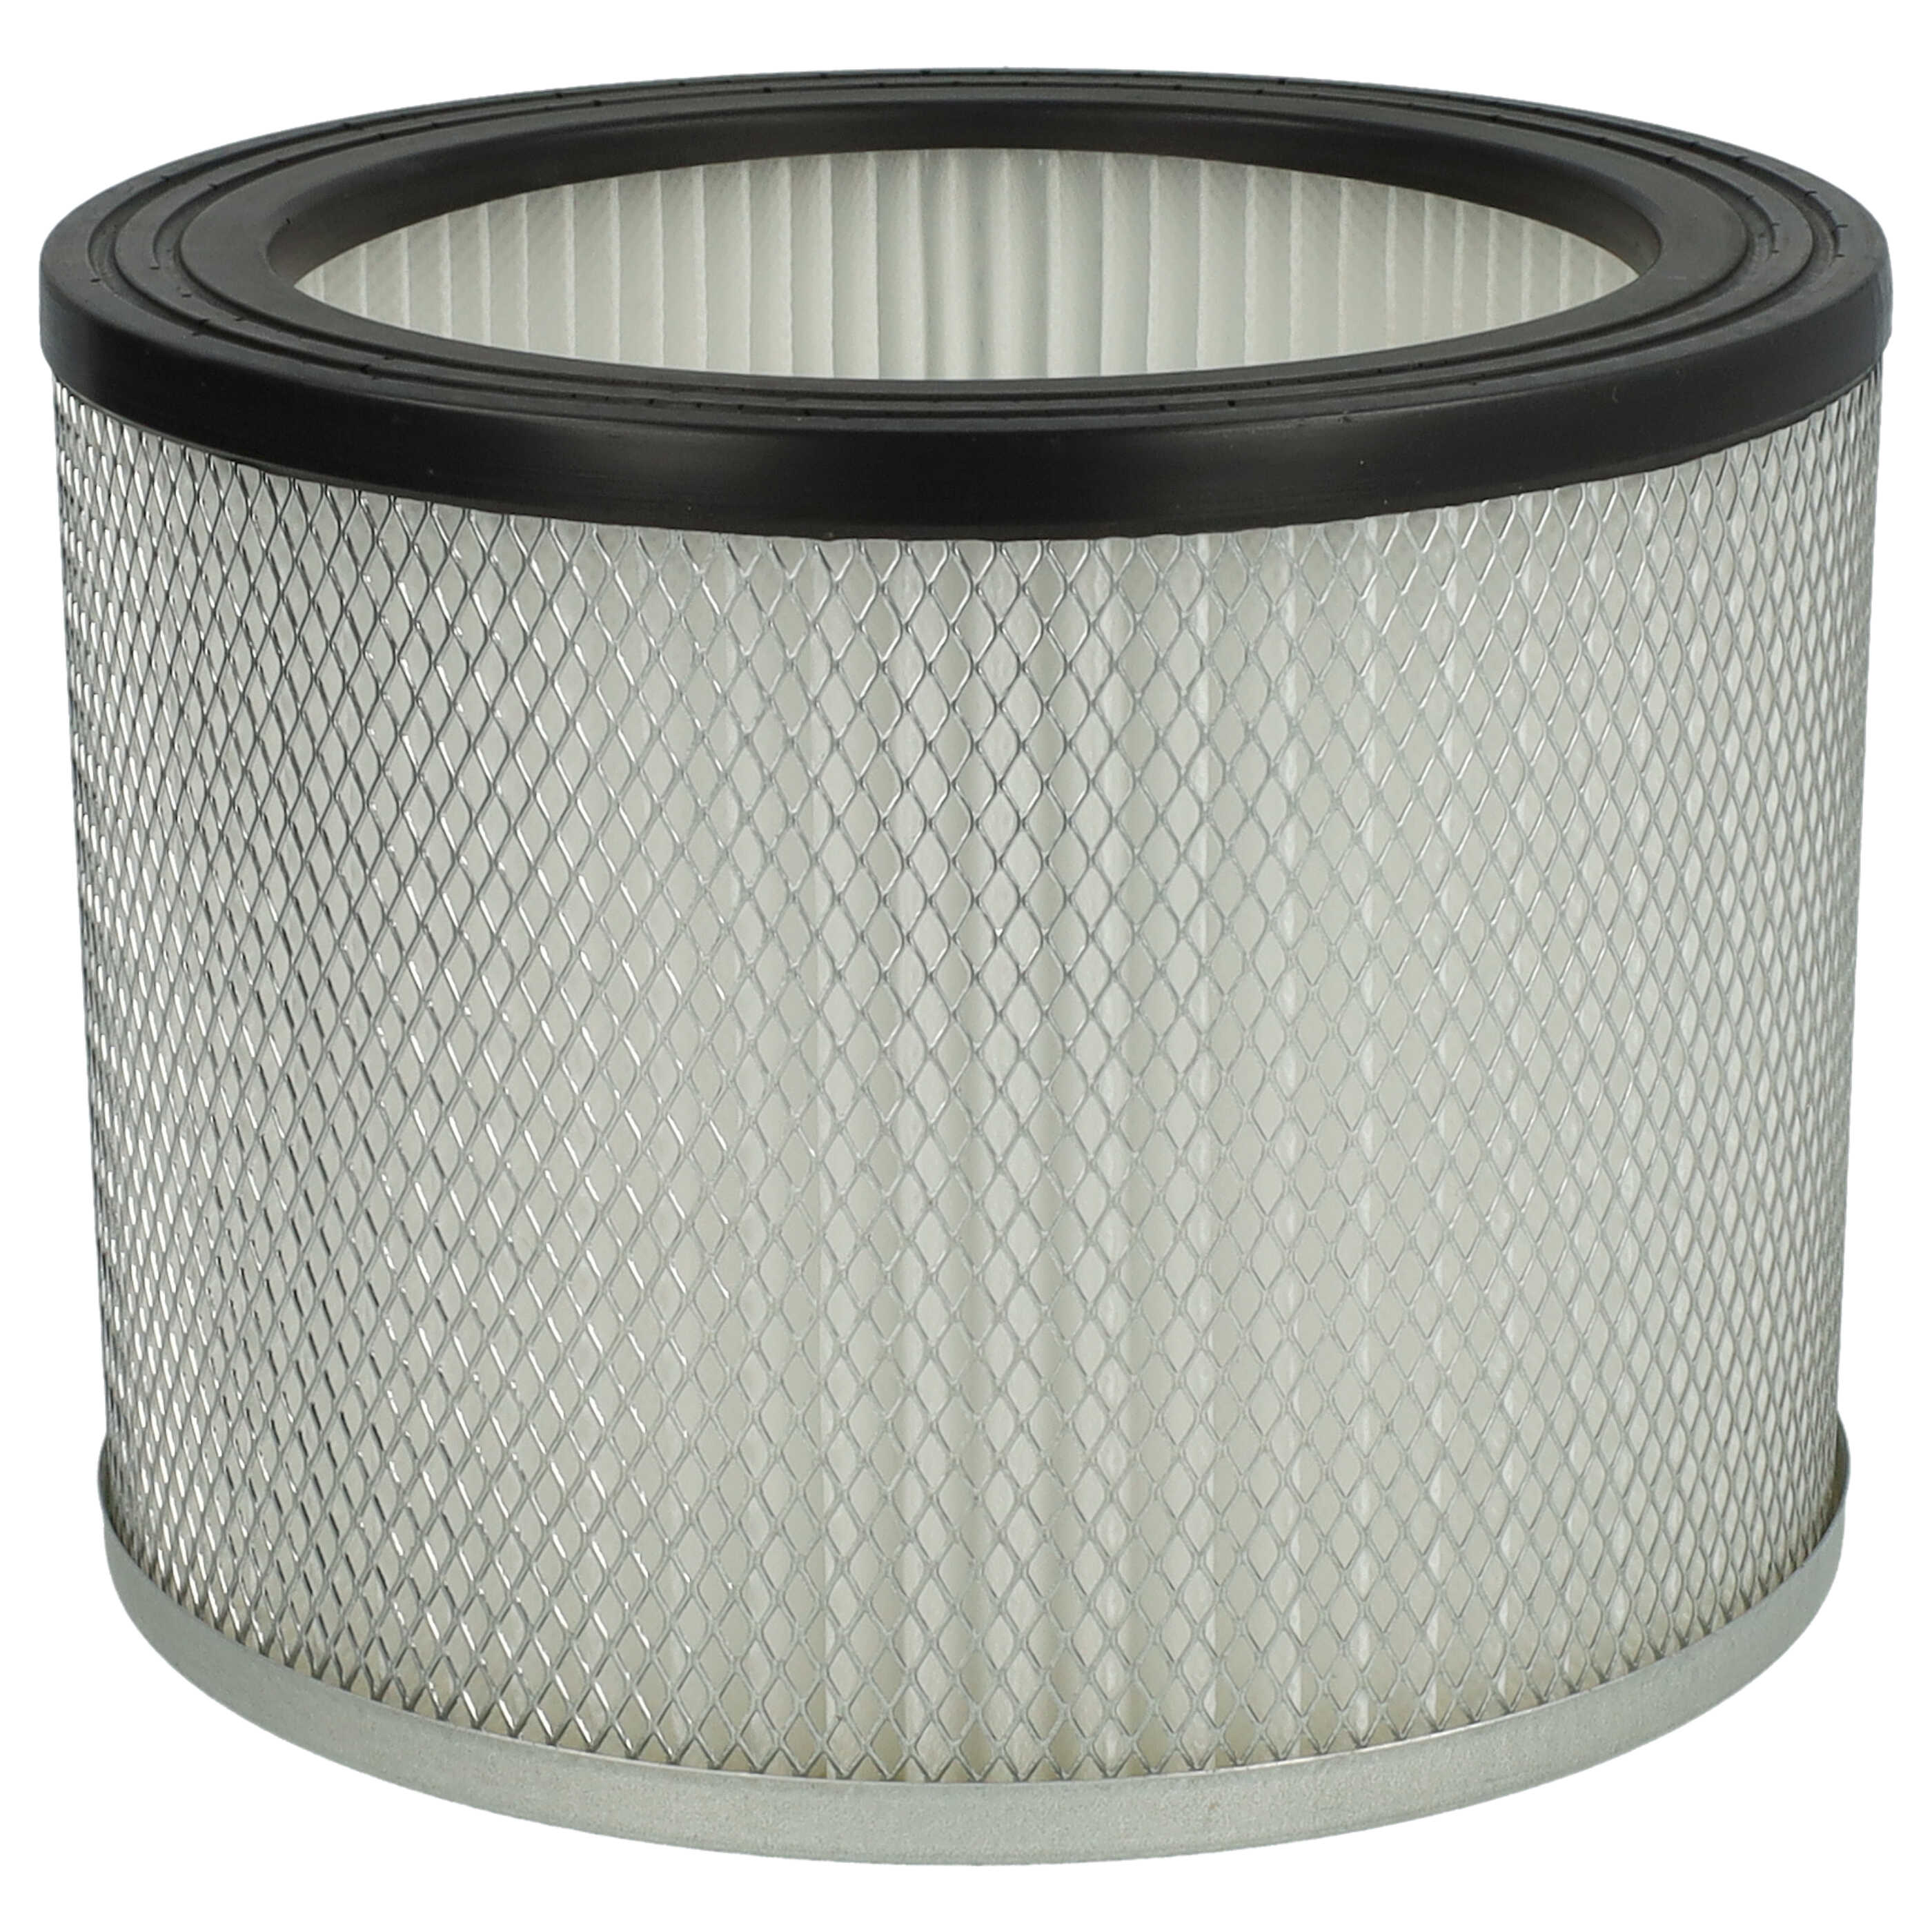 1x cartridge filter replaces ROWI 212010019 for Rowi Chimney Sweep Vacuum, white / silver